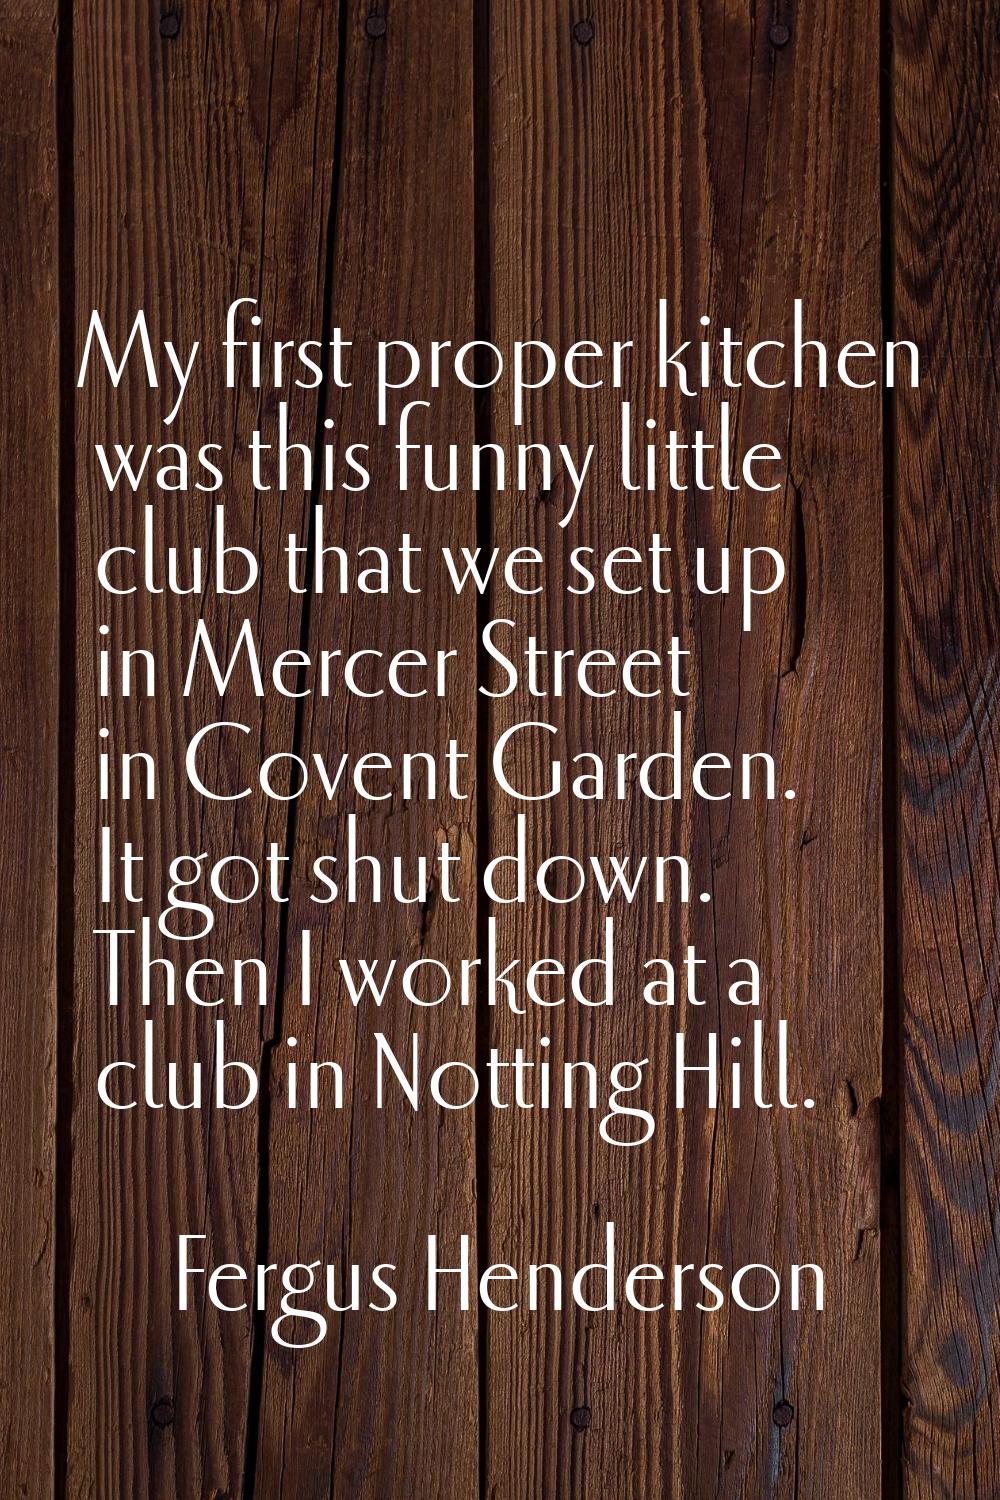 My first proper kitchen was this funny little club that we set up in Mercer Street in Covent Garden